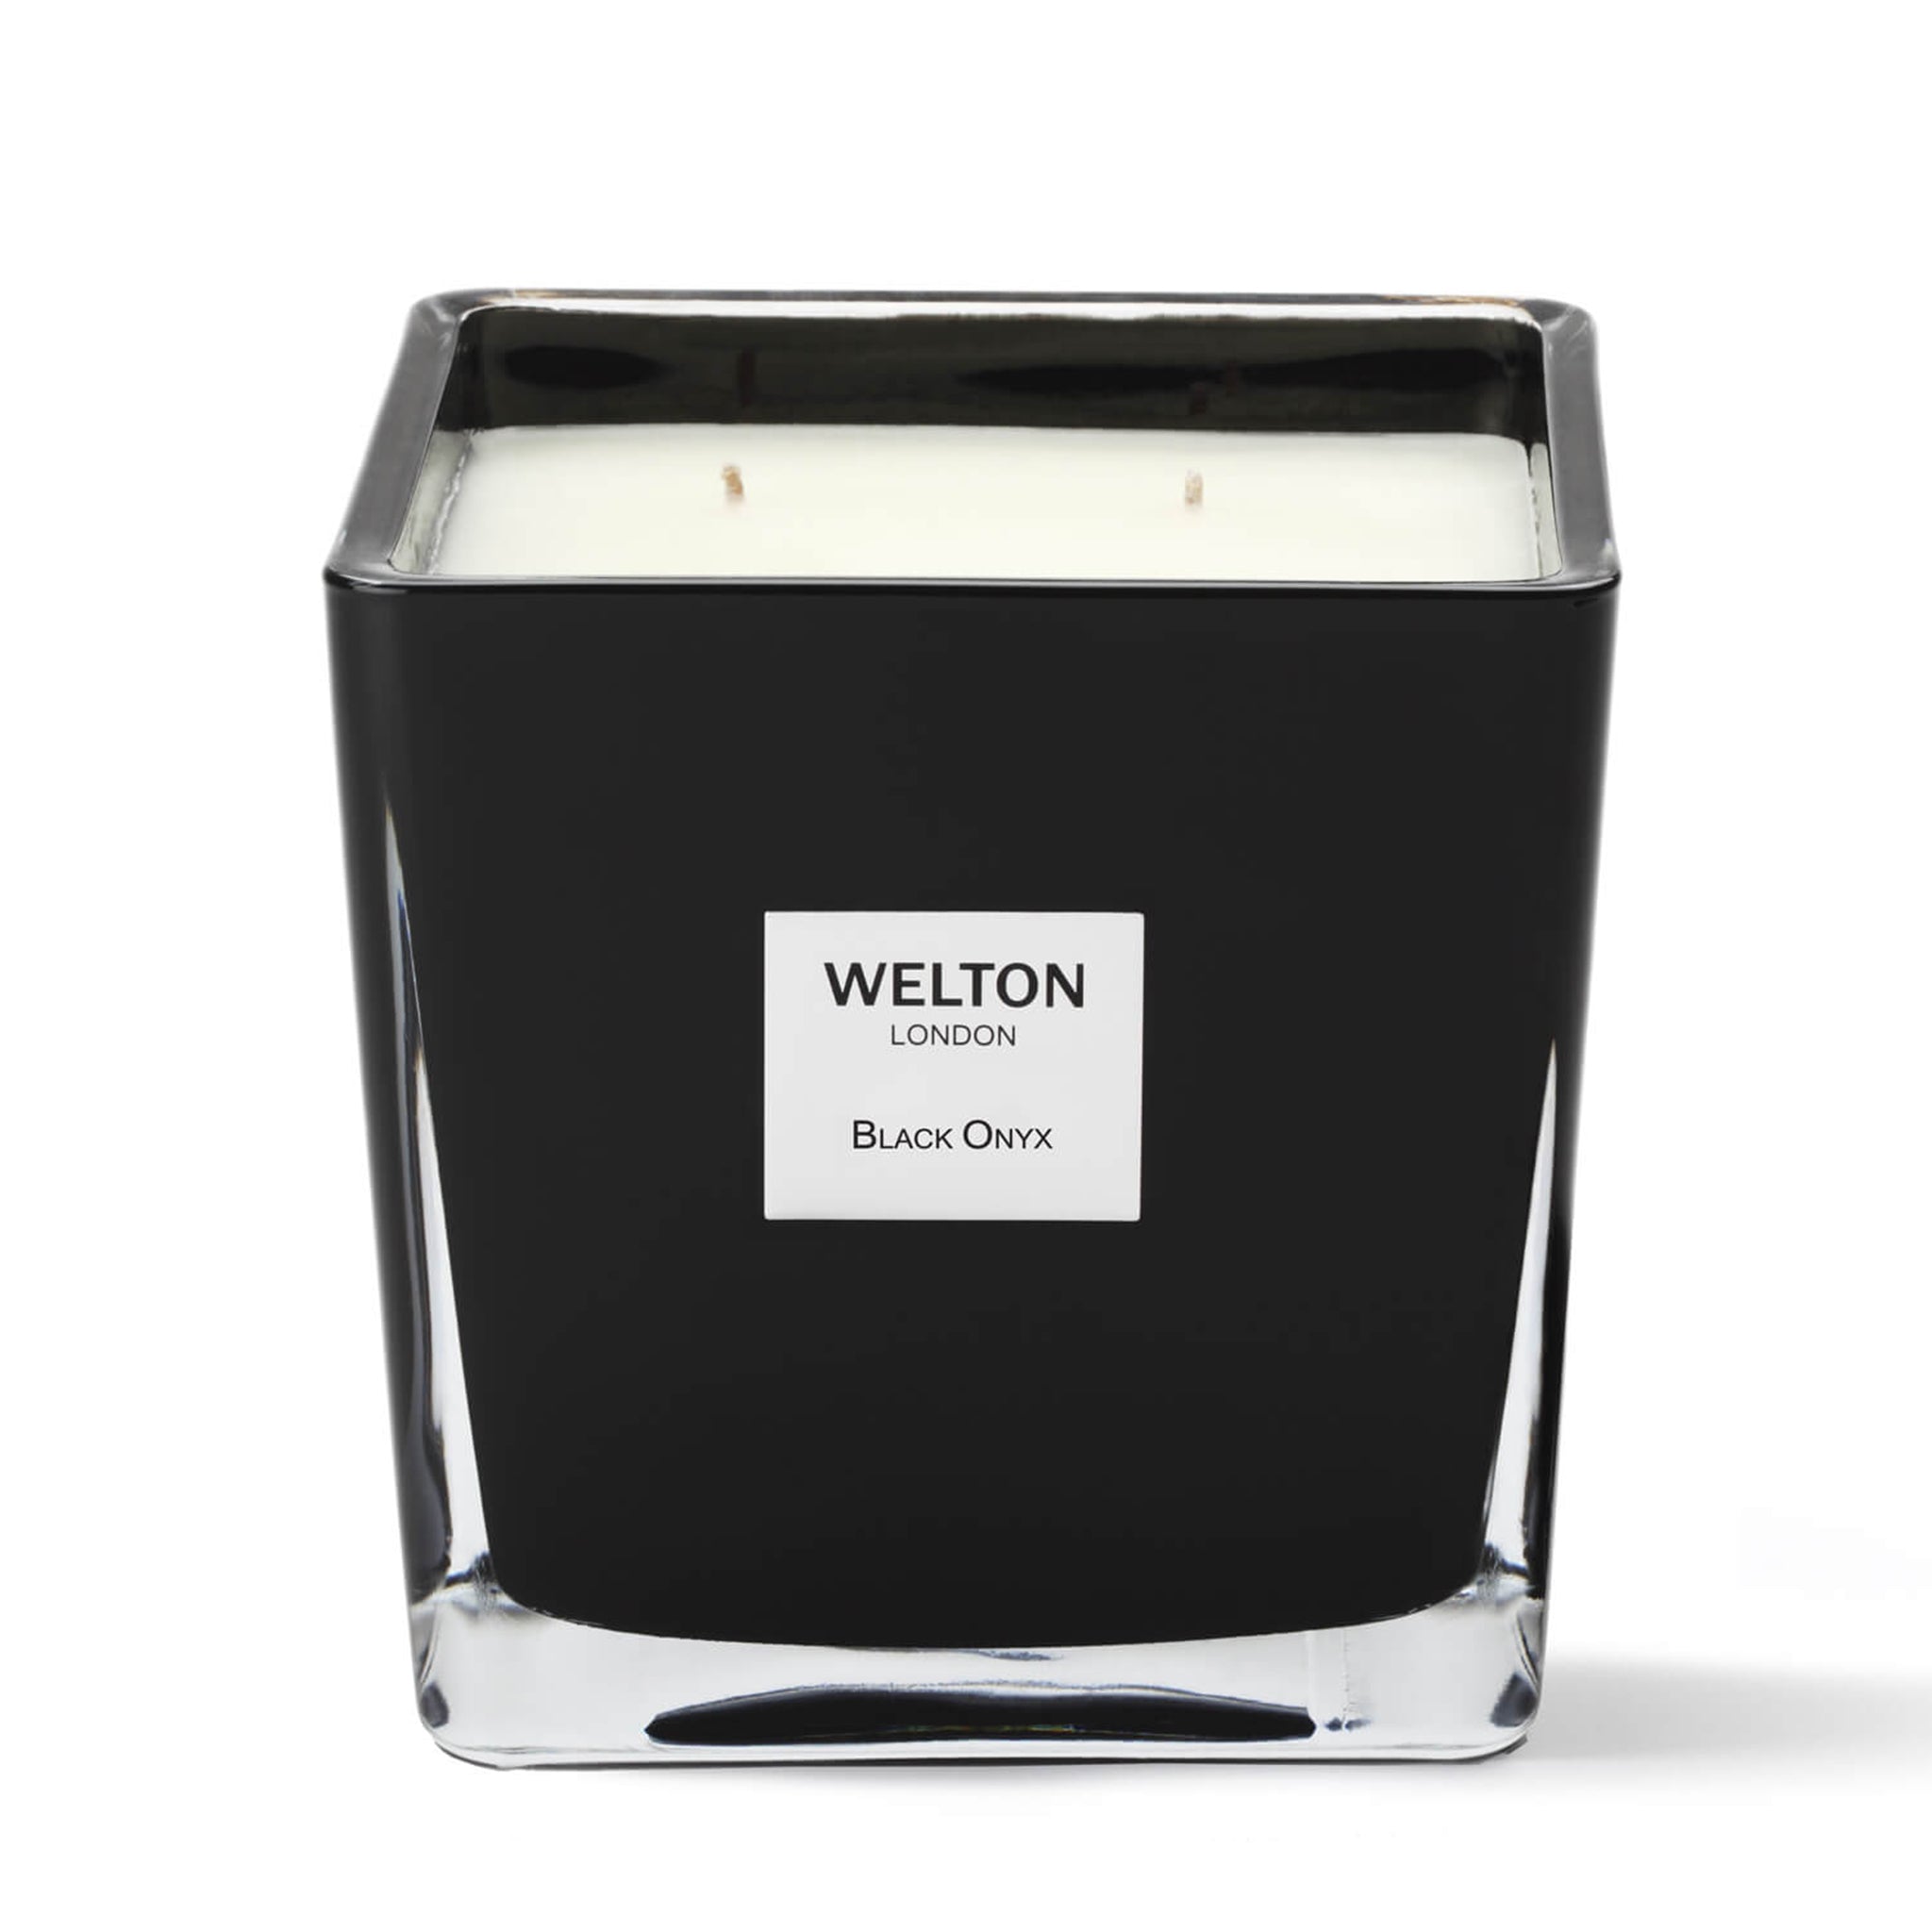 welton london candle black onyx large
citrus - woody - spicy scented candles 